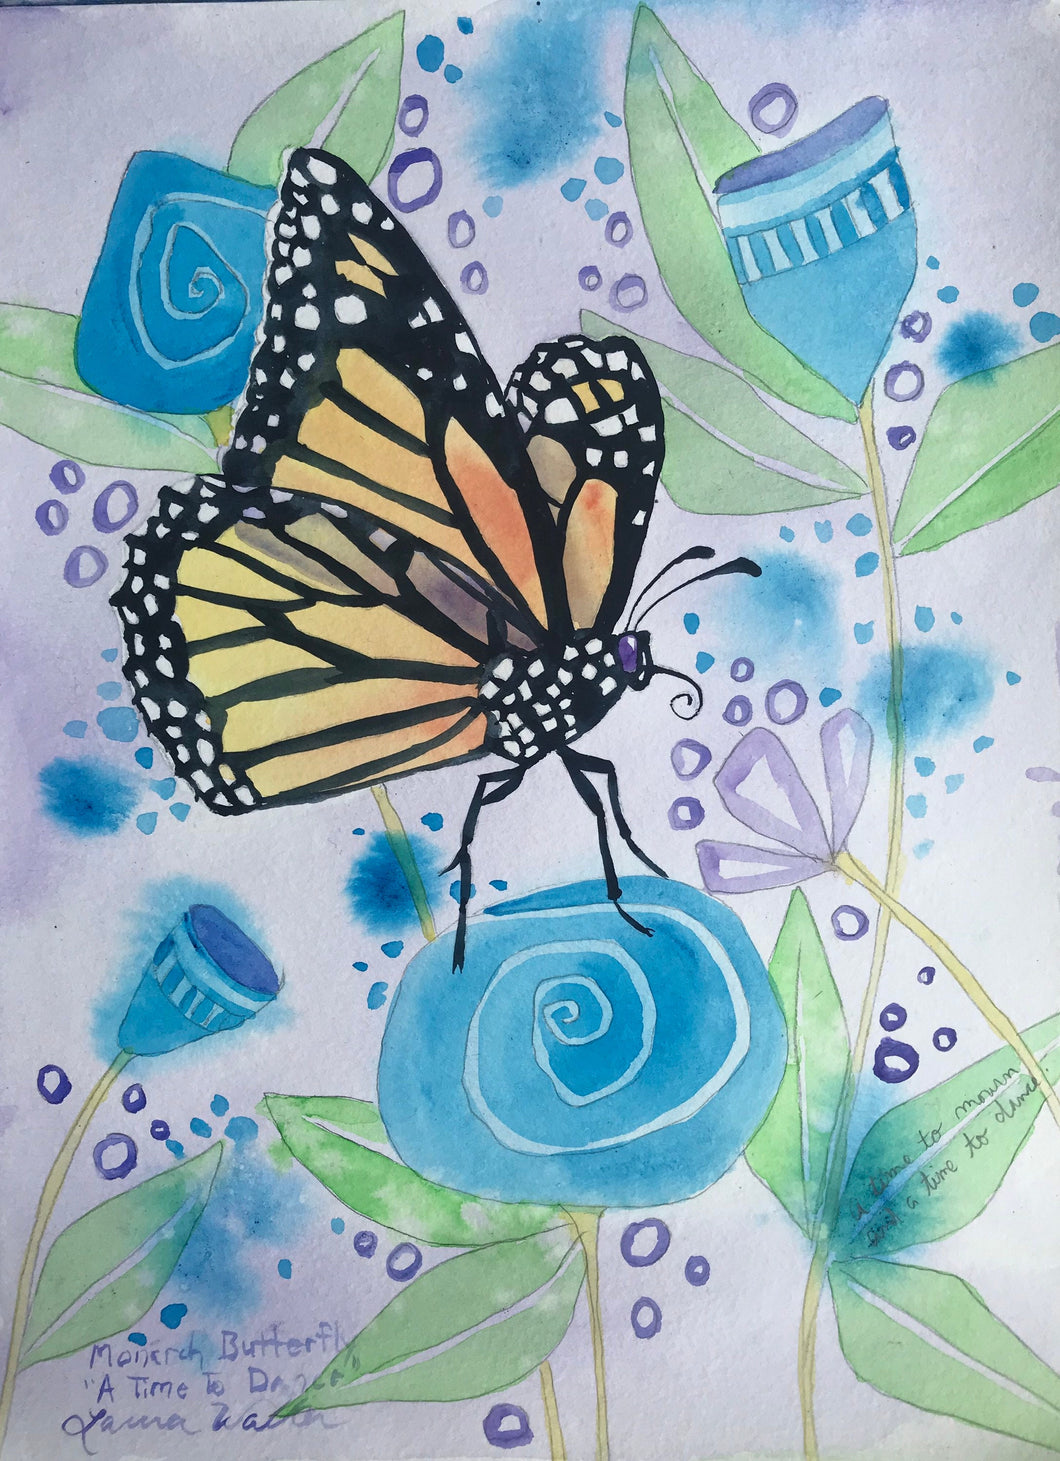 Monarch butterfly, butterfly, A Time To Dance